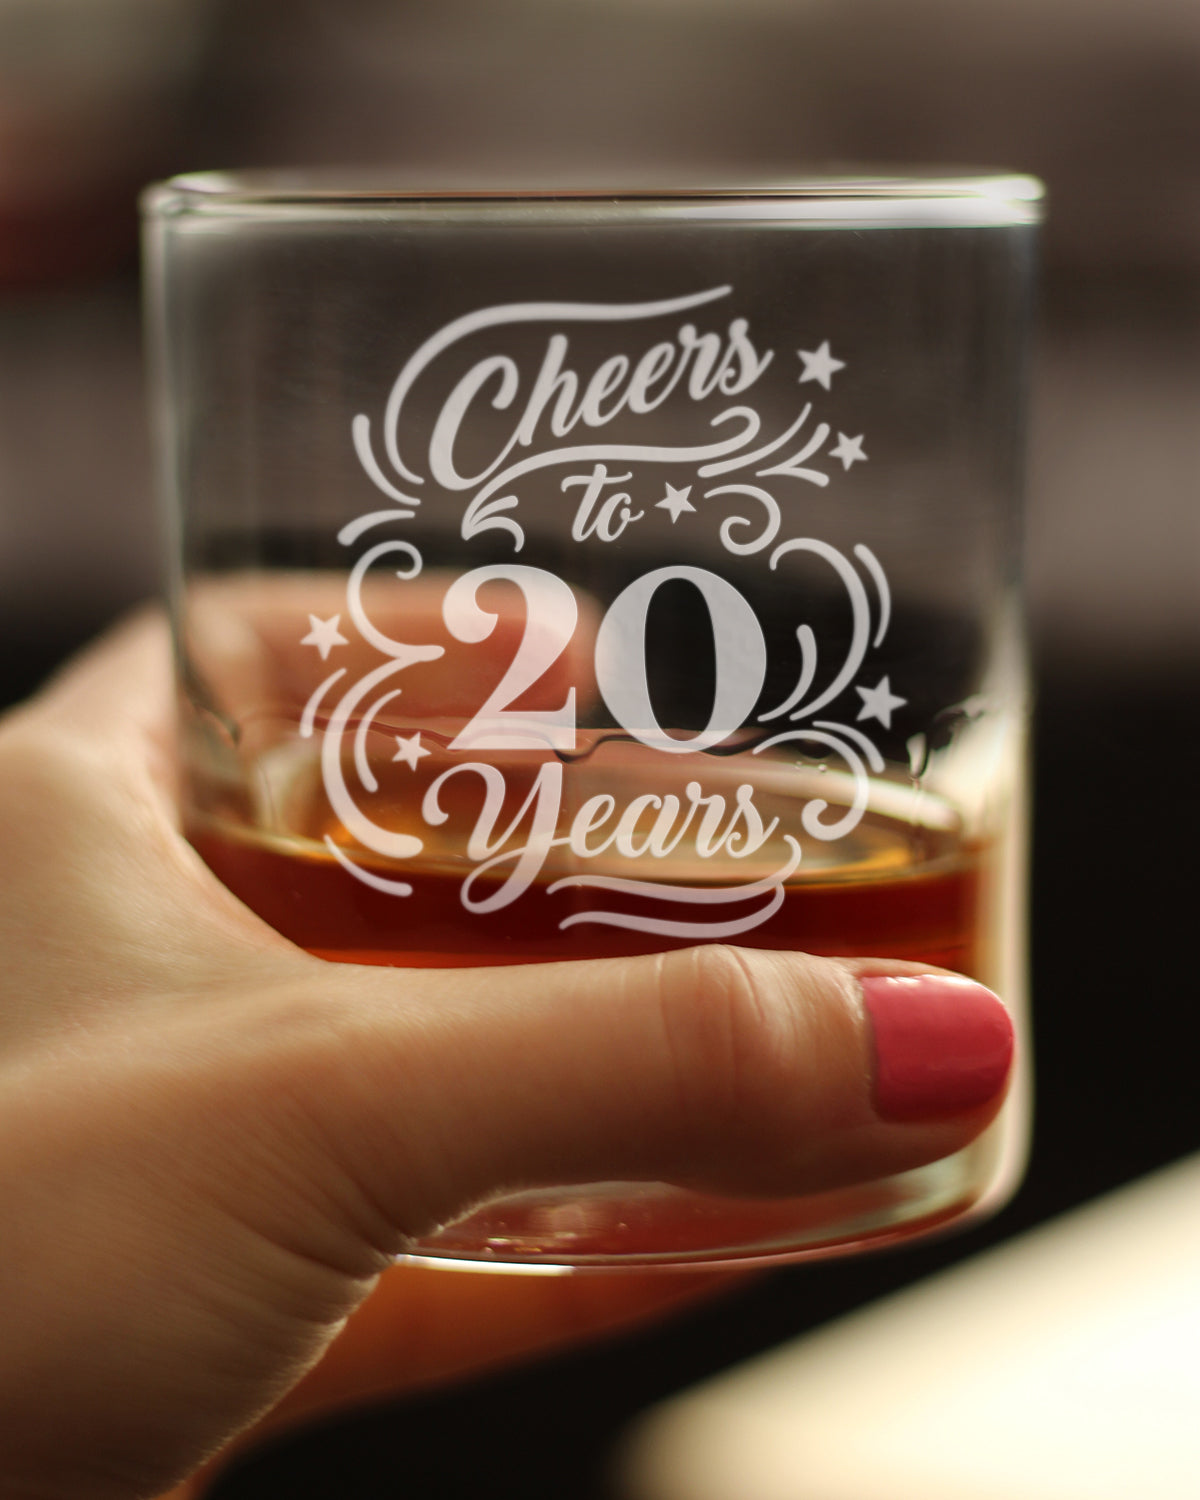 Cheers to 20 Years - Whiskey Rocks Glass Gifts for Women &amp; Men - 20th Anniversary Party Decor - 10.25 Oz Glasses